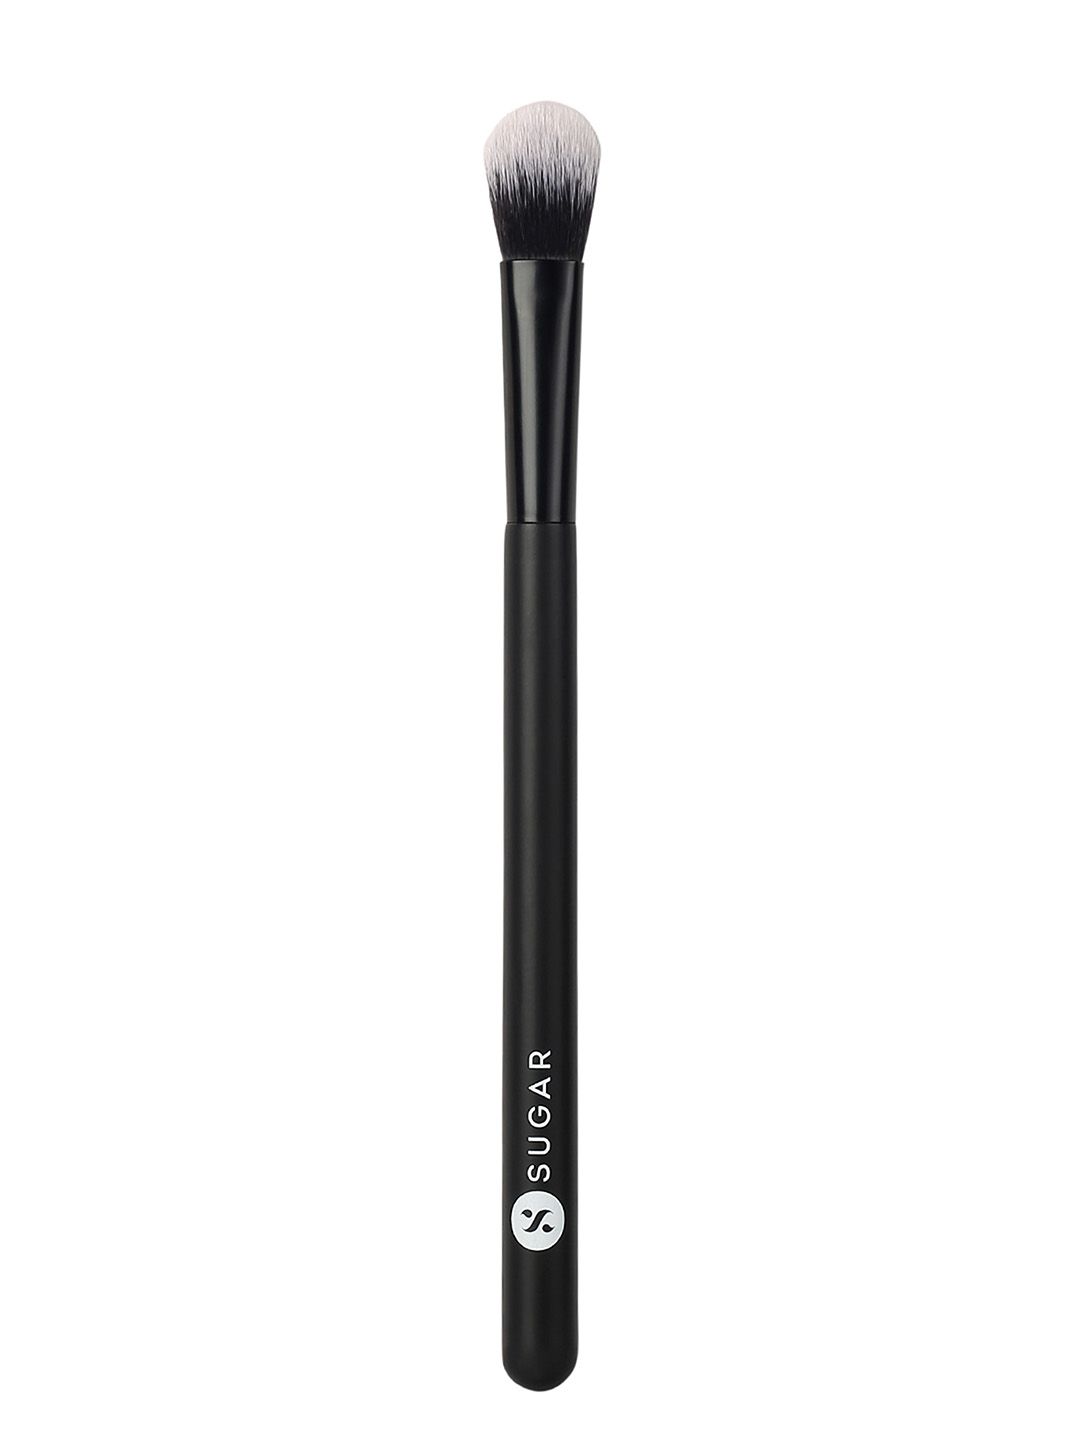 SUGAR Blend Trend Face Brush - 006 Highlighter Price in India